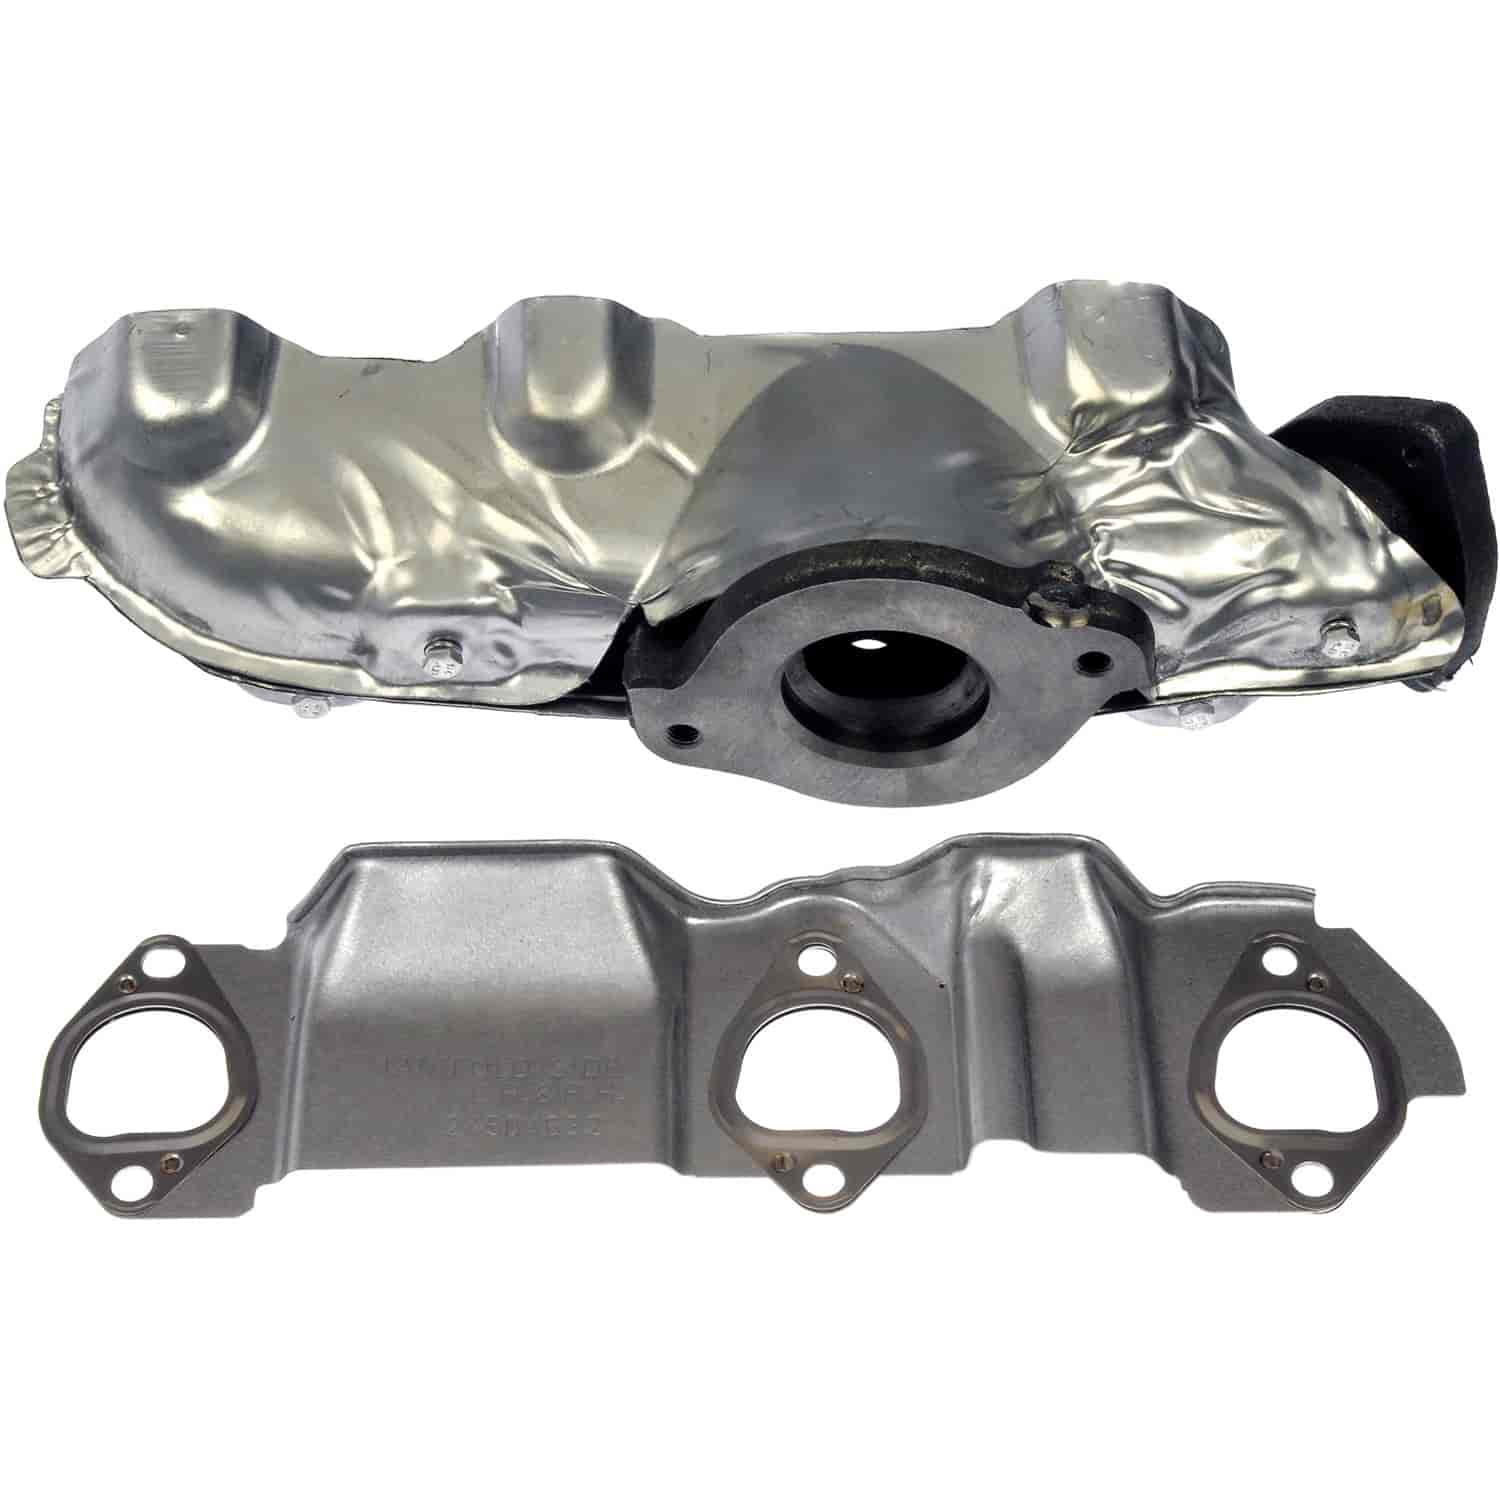 Cast Iron Exhaust Manifold. Includes Gaskets and Hardware to Downpipe